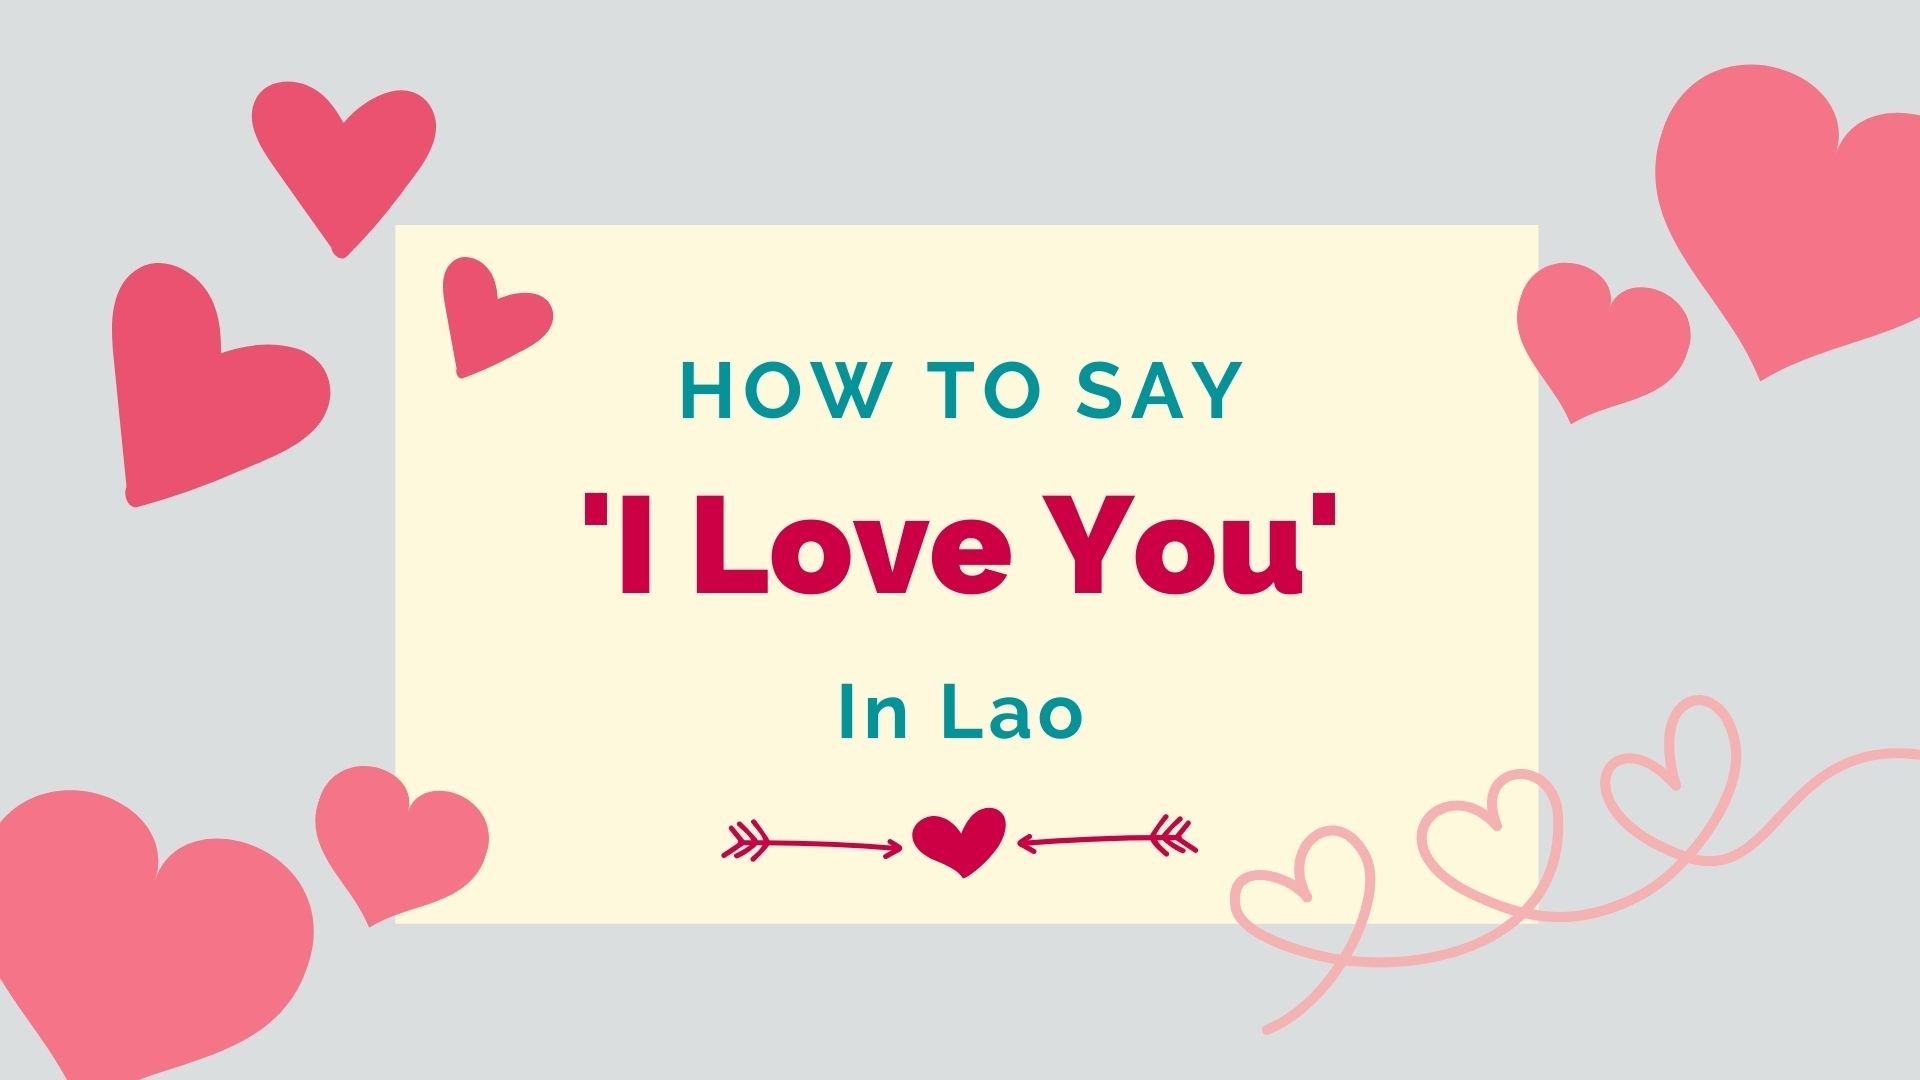 How To Say ‘I Love You’ In Lao + Other Romantic Phrases - Lingalot